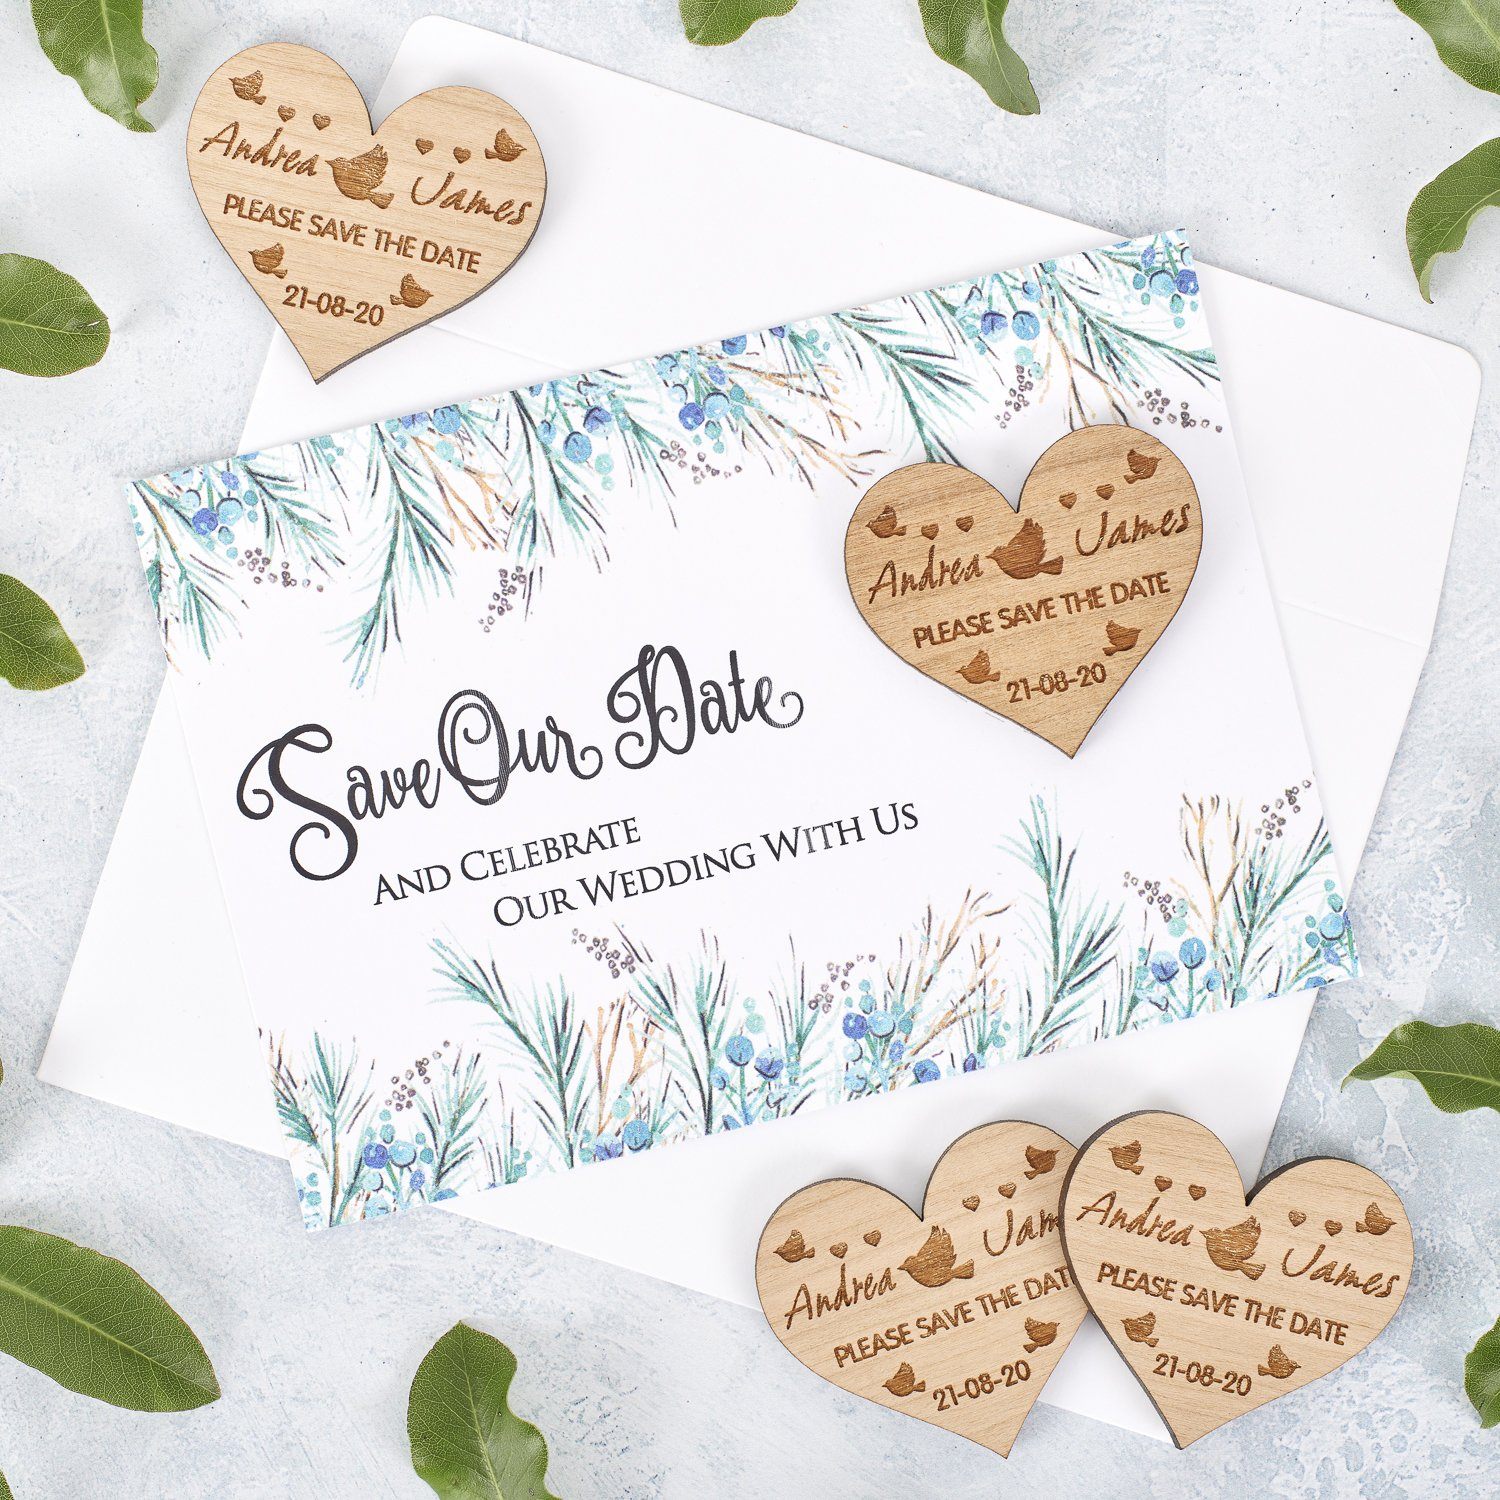 Save The Date Magnet With Cards - Save The Date Magnet Wooden Rustic & Cards - Heart Lovebirds